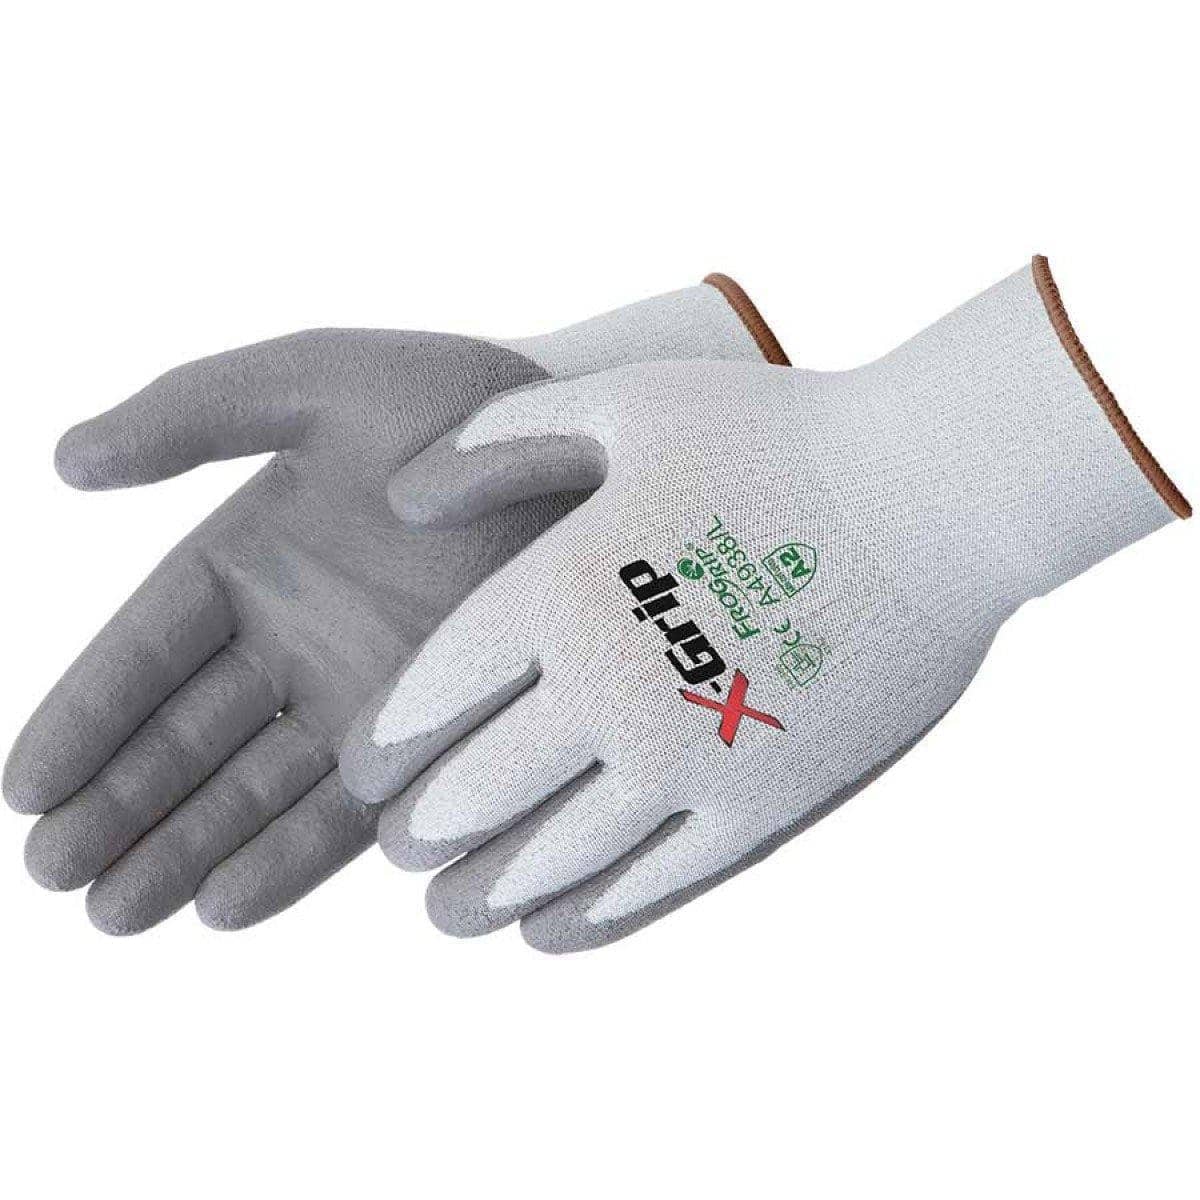 LIBERTY - X Grip Polyurethane Palm Coated, Gray - Becker Safety and Supply